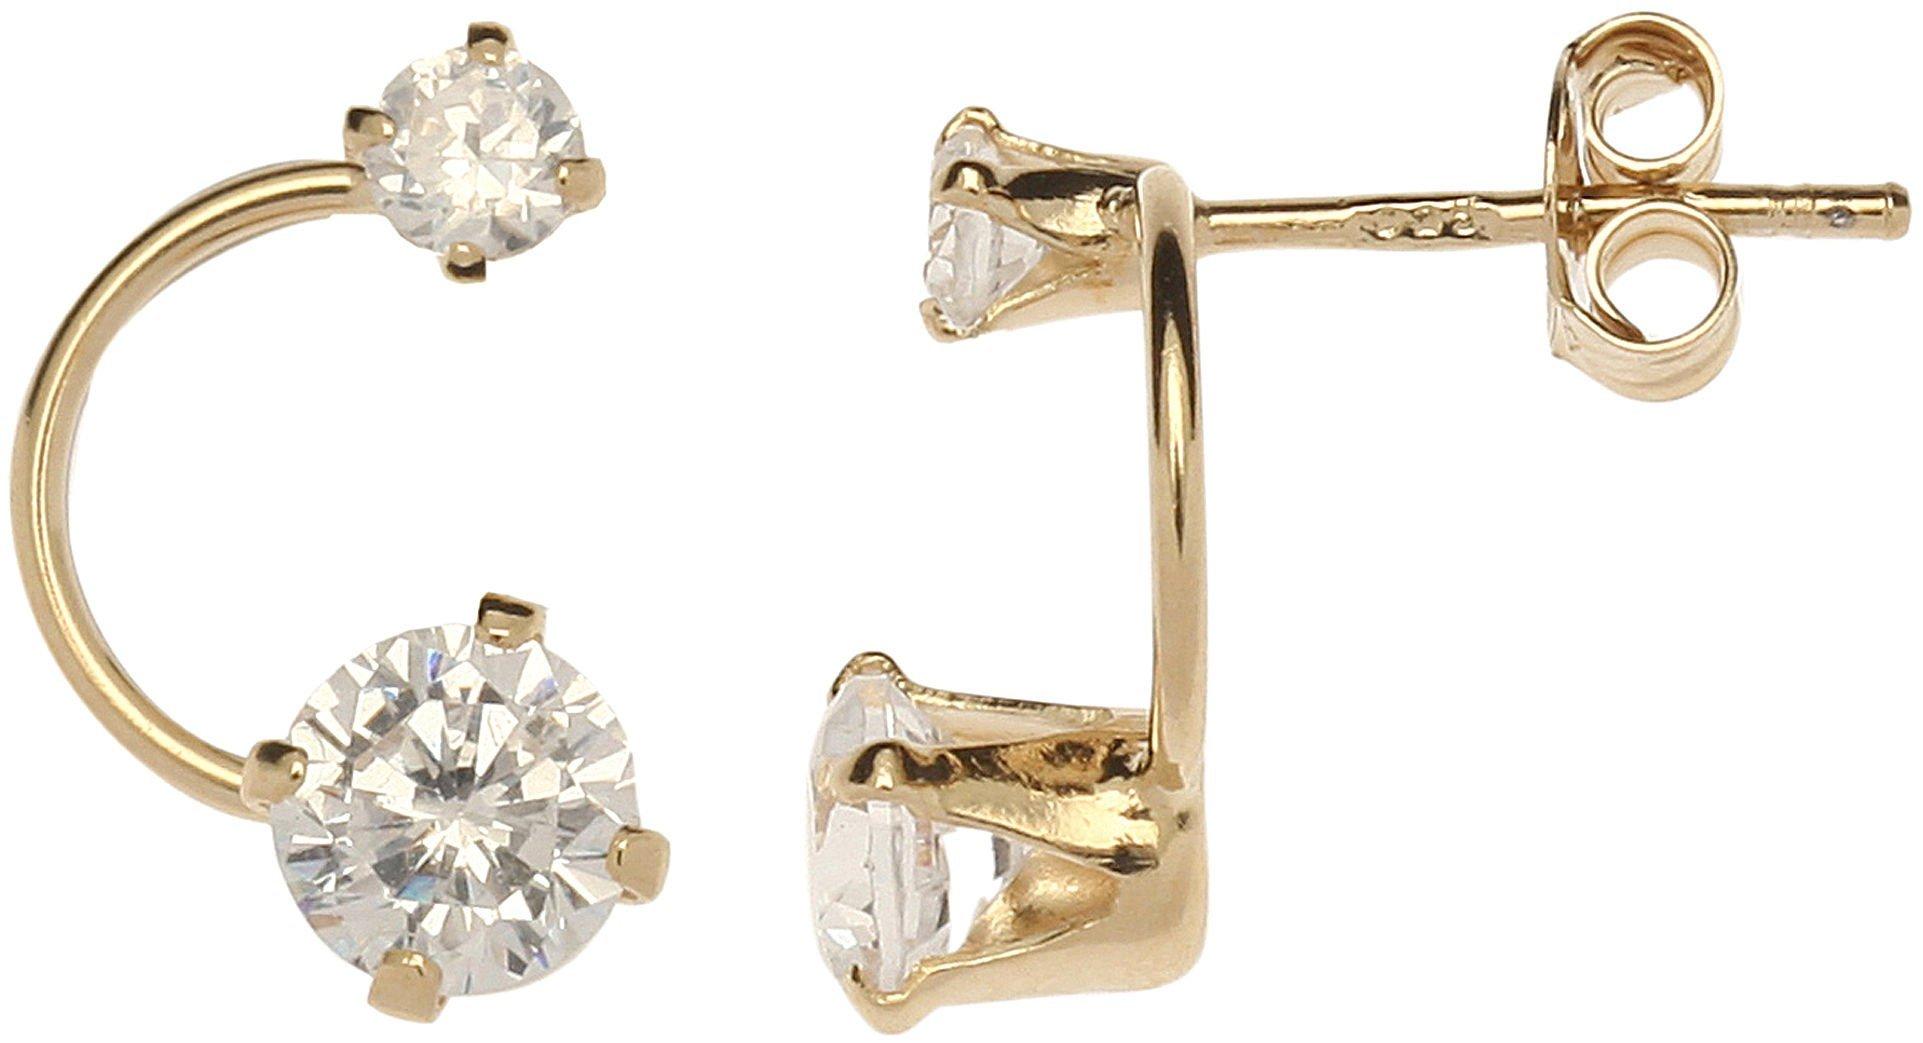 Piper & Taylor Curved Rhinestone Earring